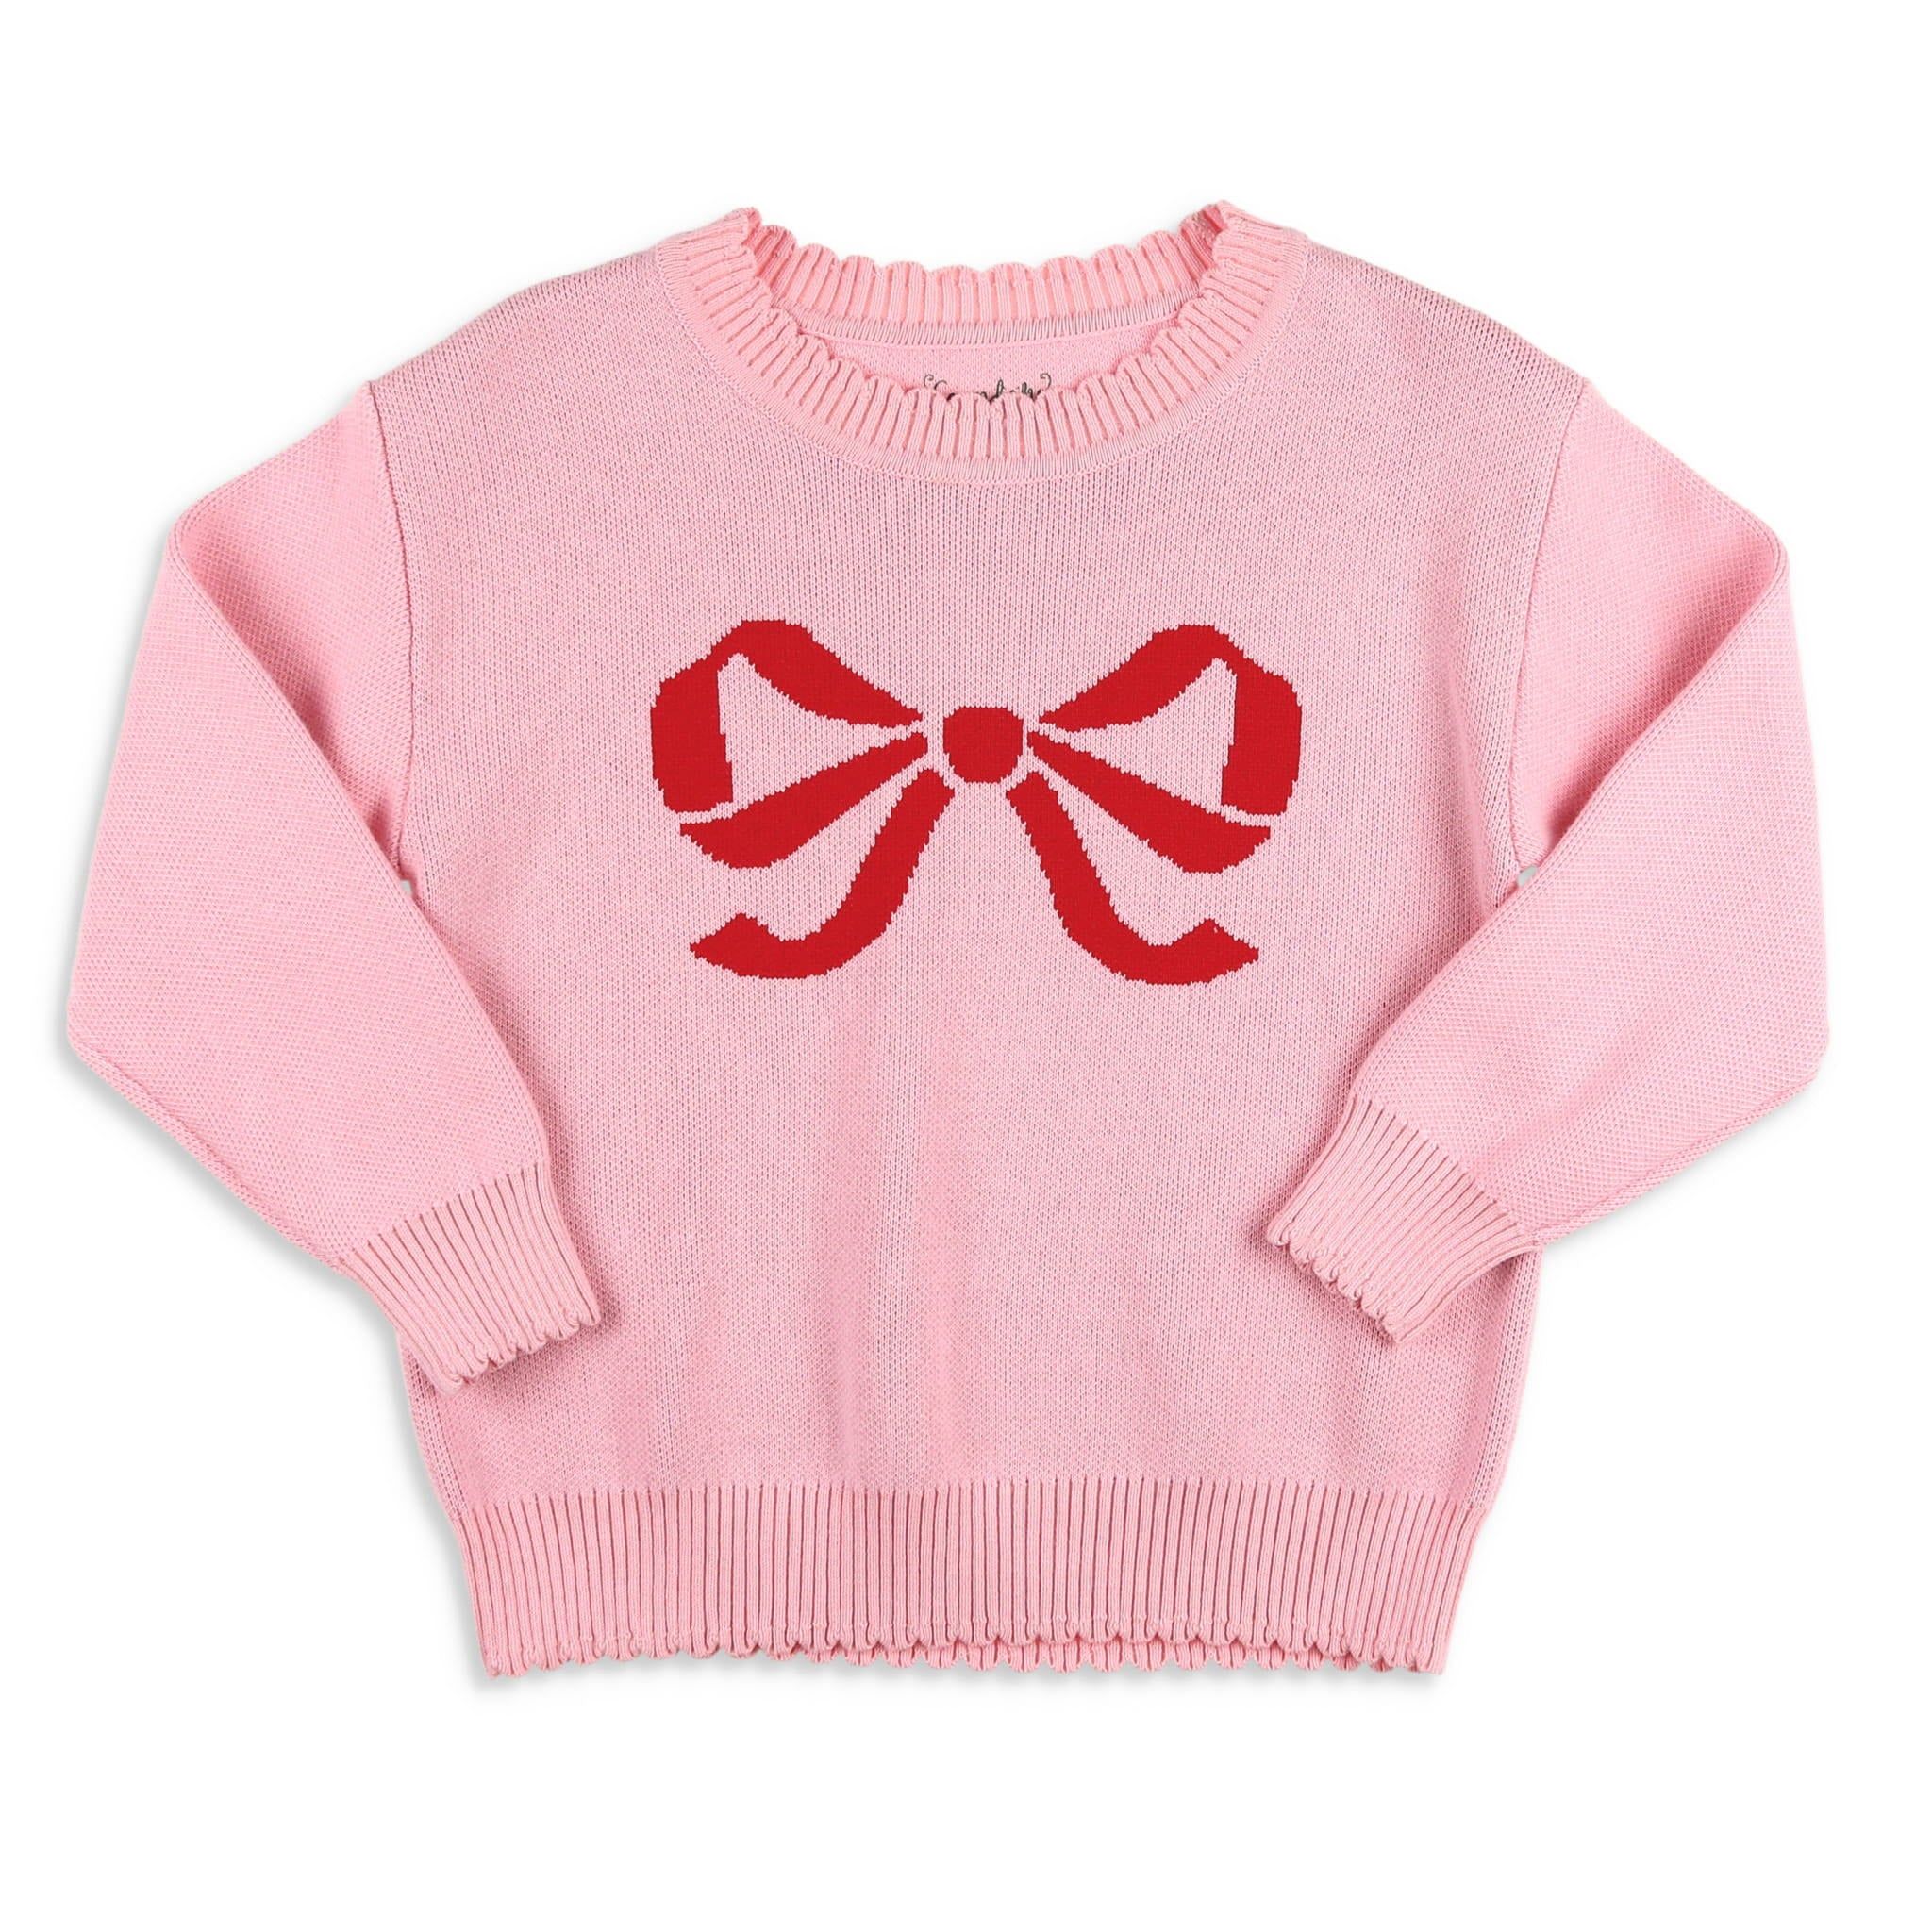 Pretty In Pink Bow Sweater - Shrimp and Grits Kids | Shrimp and Grits Kids